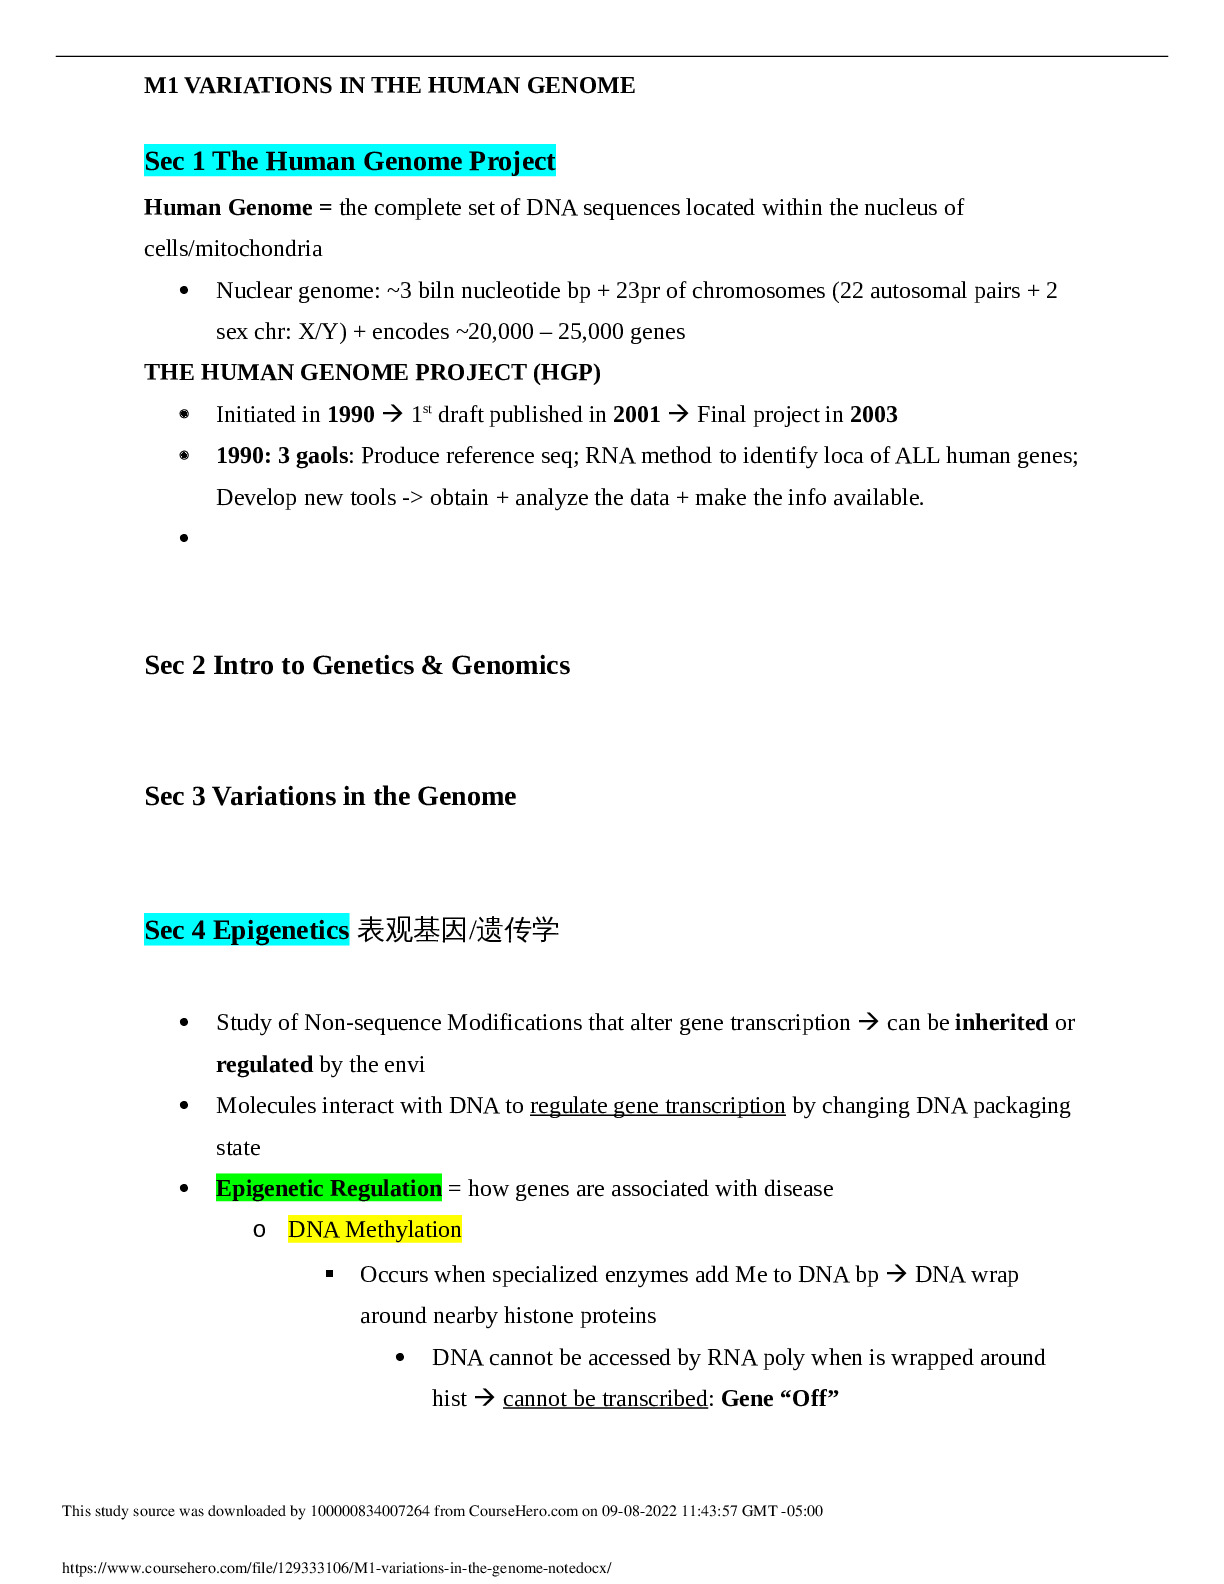 M1_variations_in_the_genome_note.docx